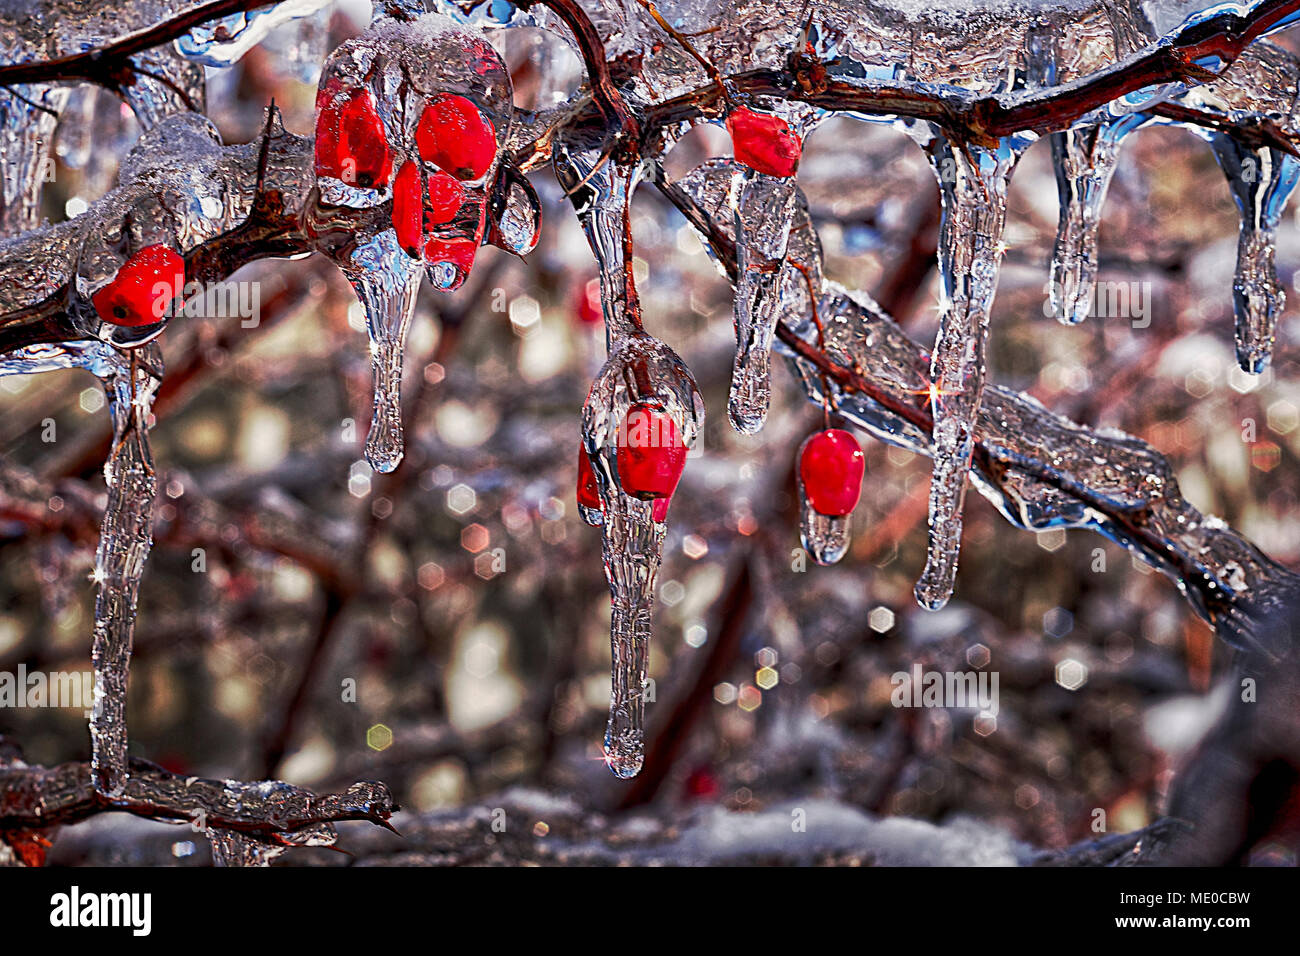 Frozen red berries after freezing rain storm, Eastern Ontario, Canada Stock Photo